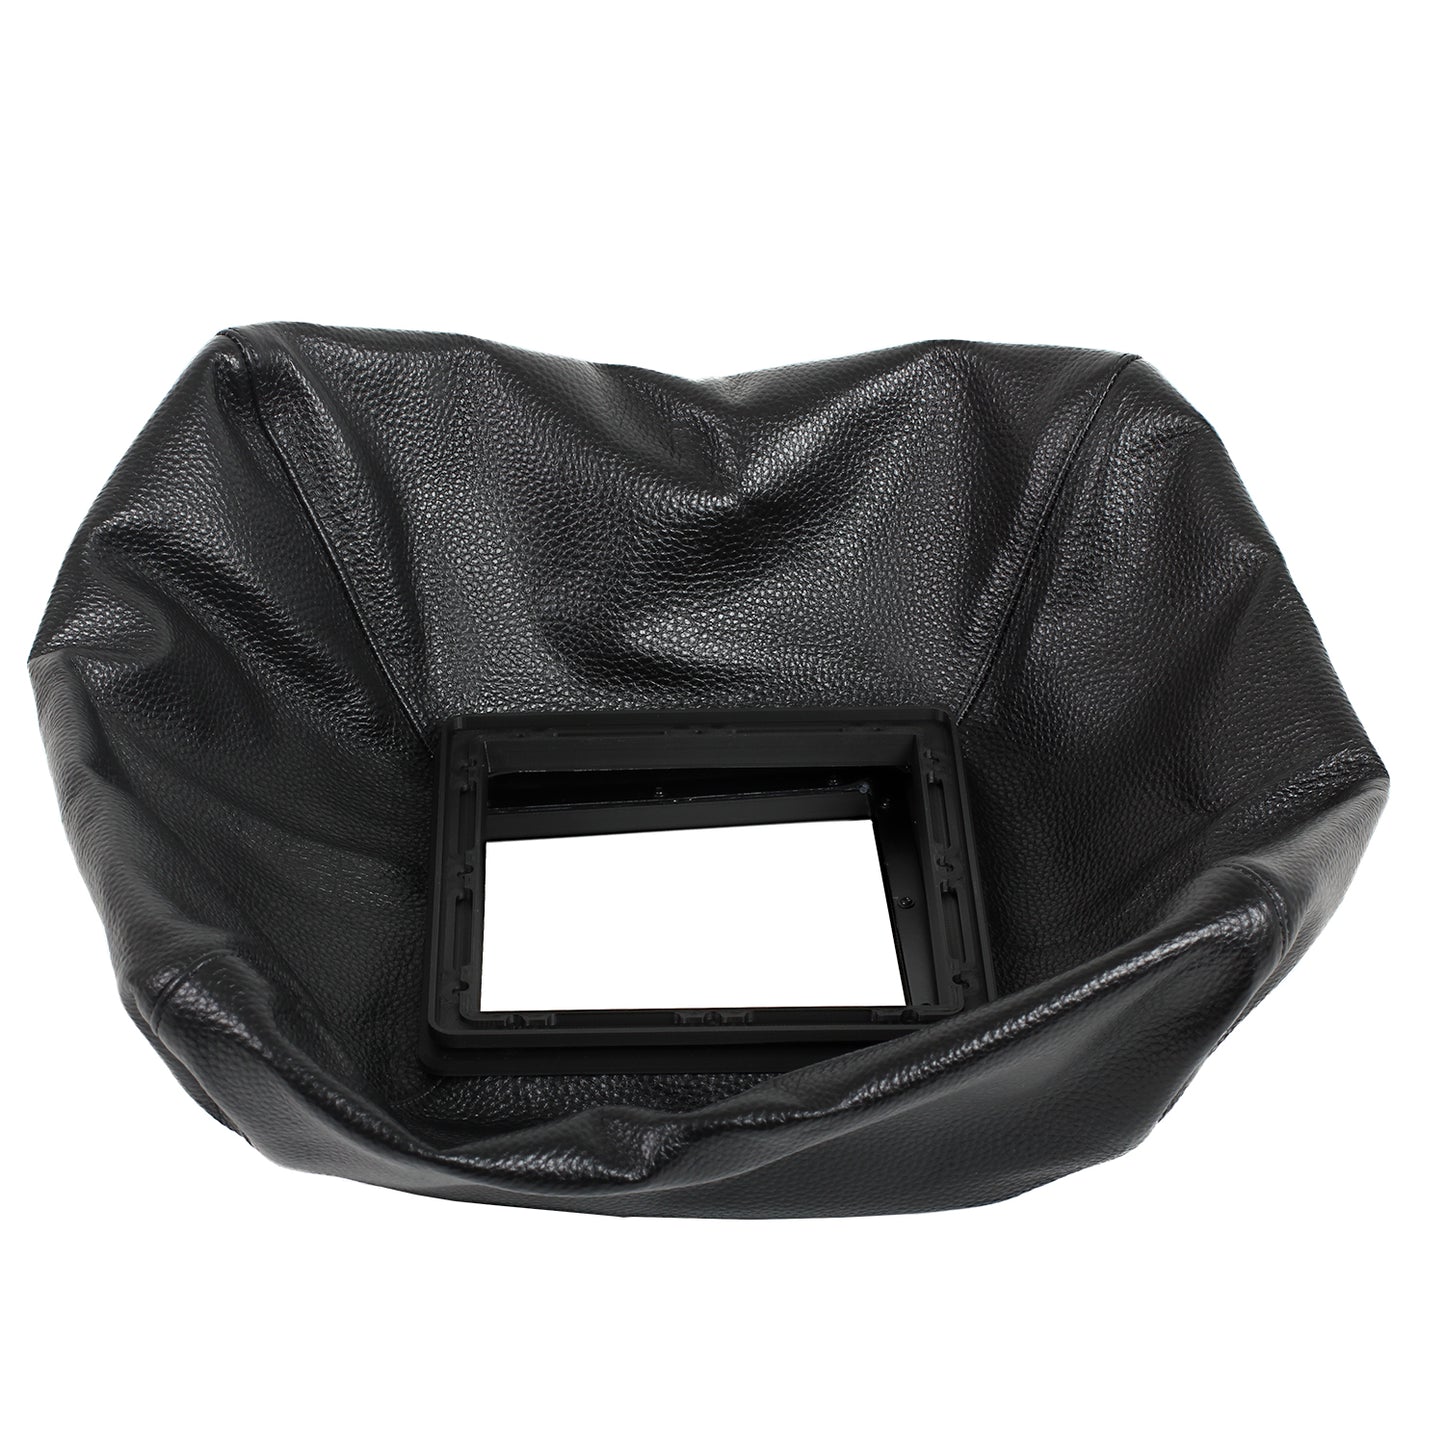 NEW eTone Wide Angle Bag Bellows For Wista 45D RF SP VX 4x5 large Format Camera